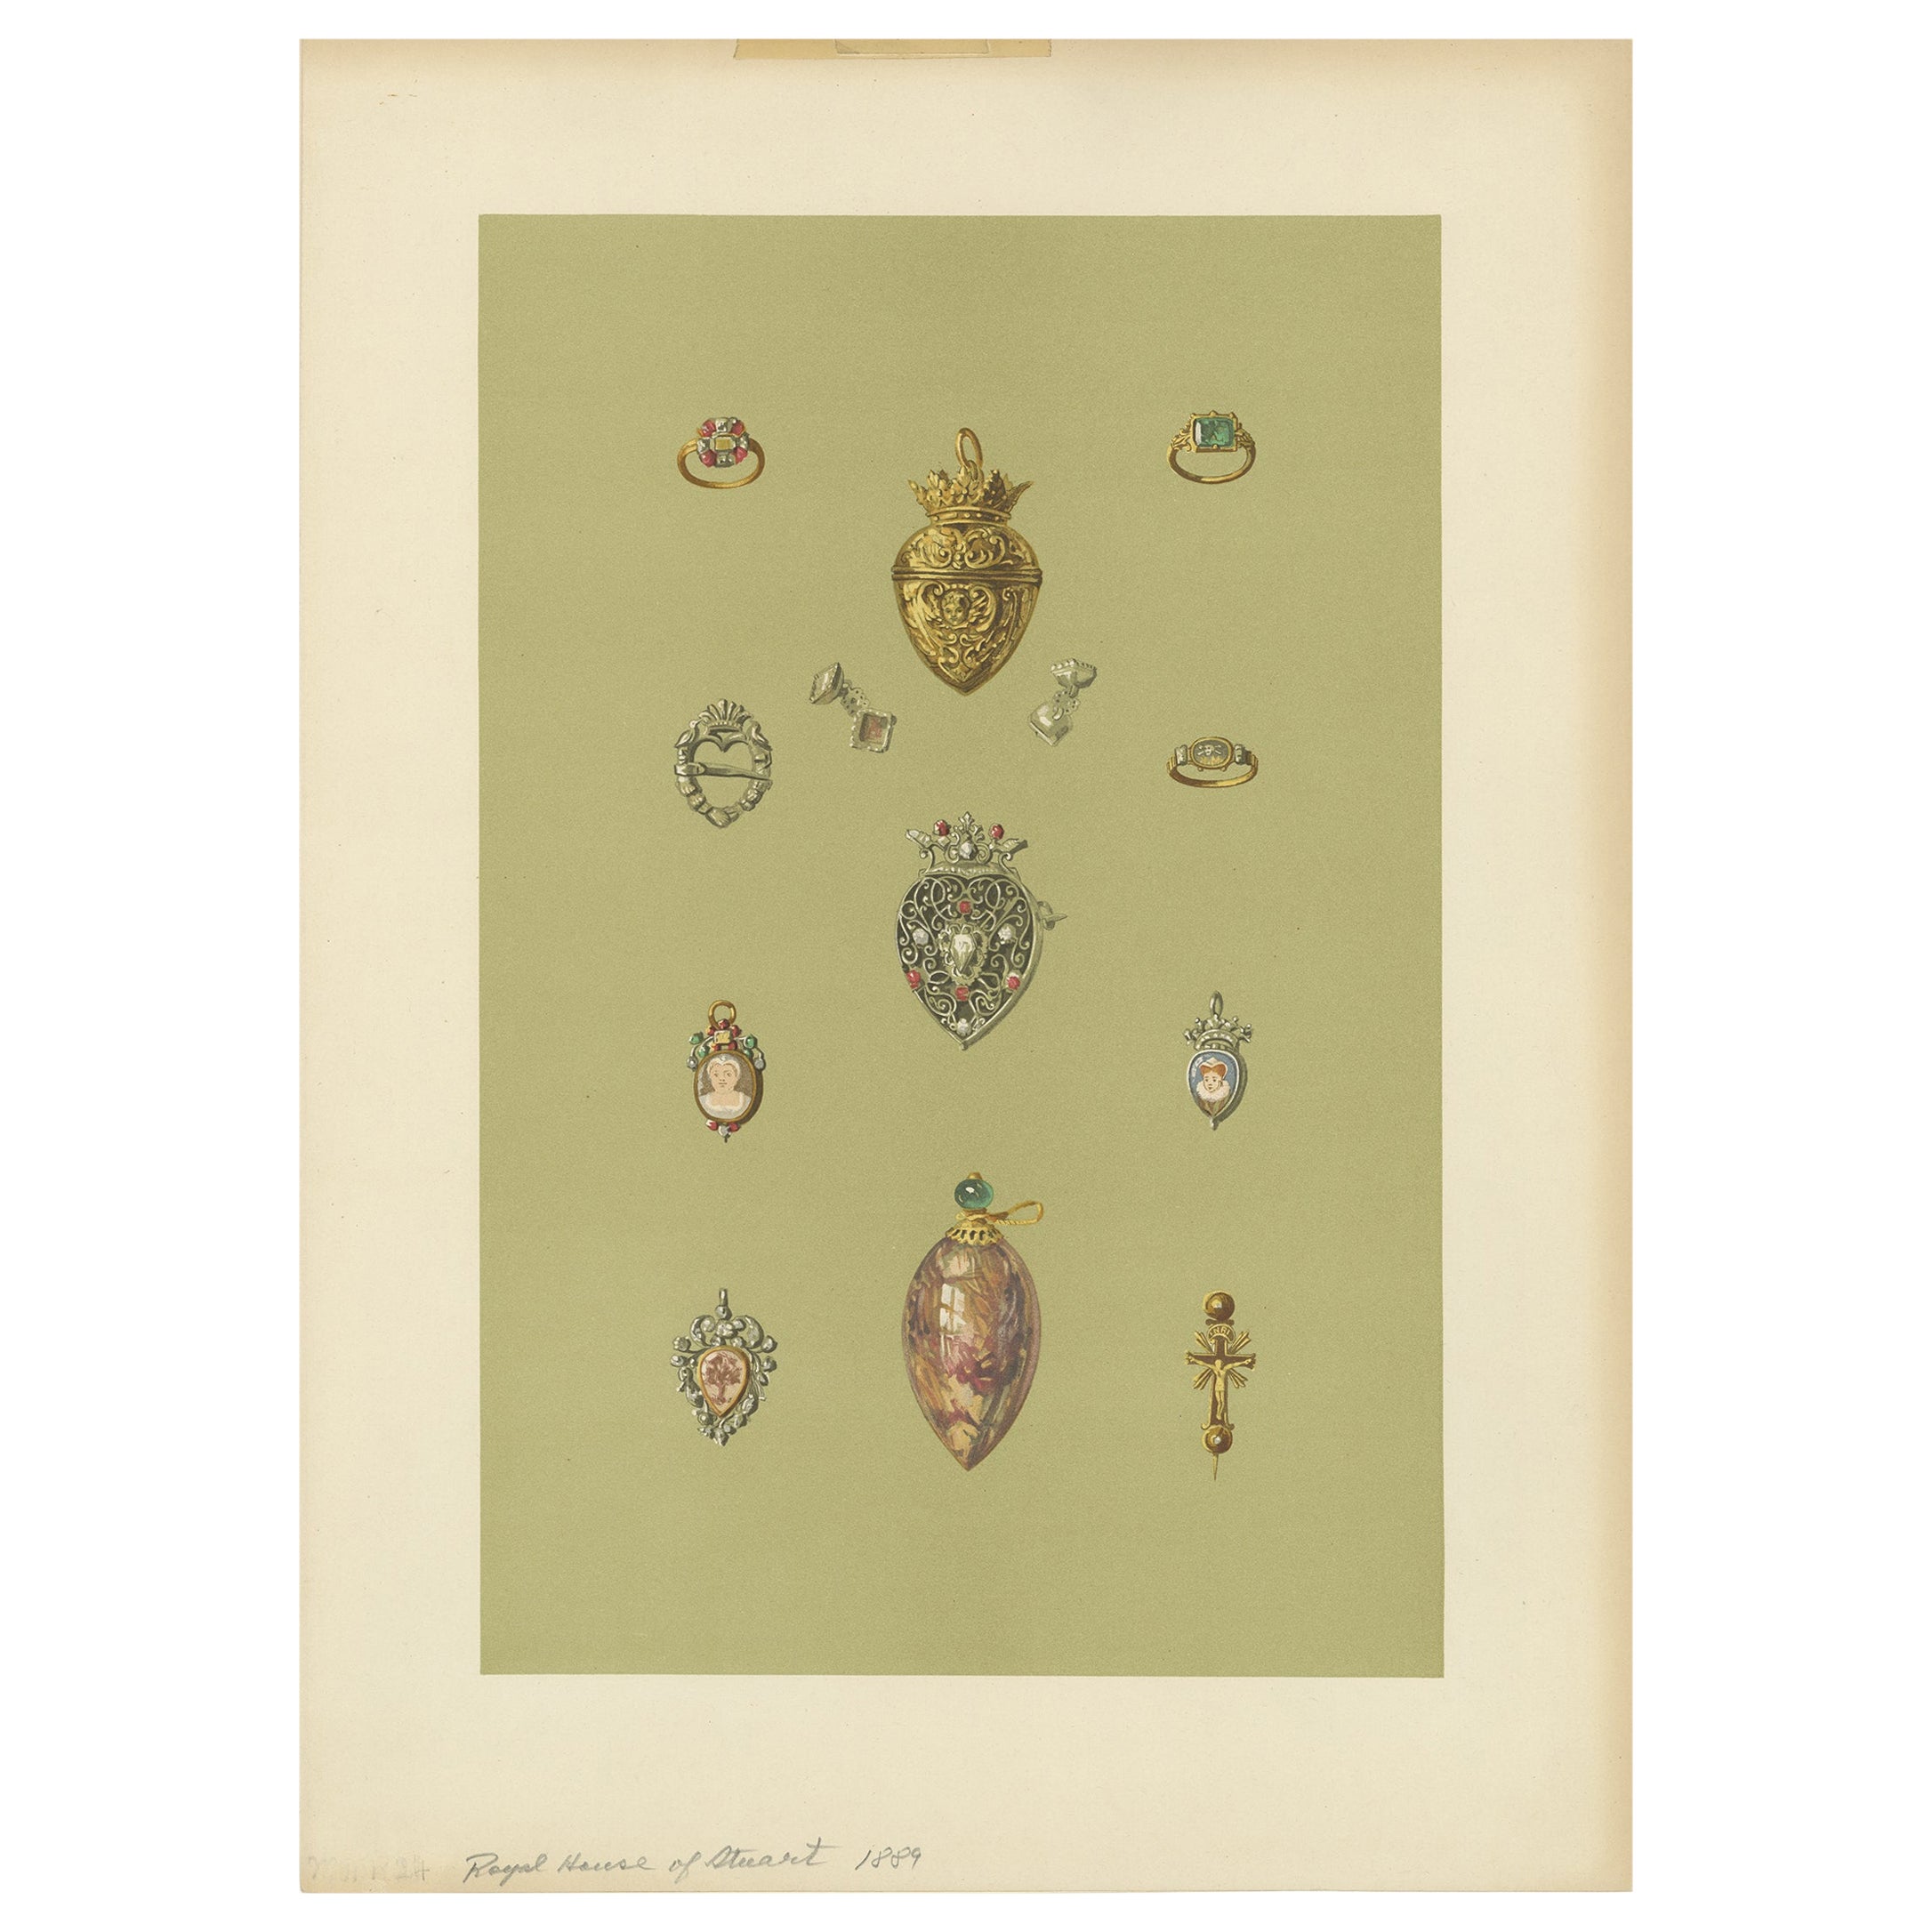 Antique Print of Various Accessories by Gibb, 1890